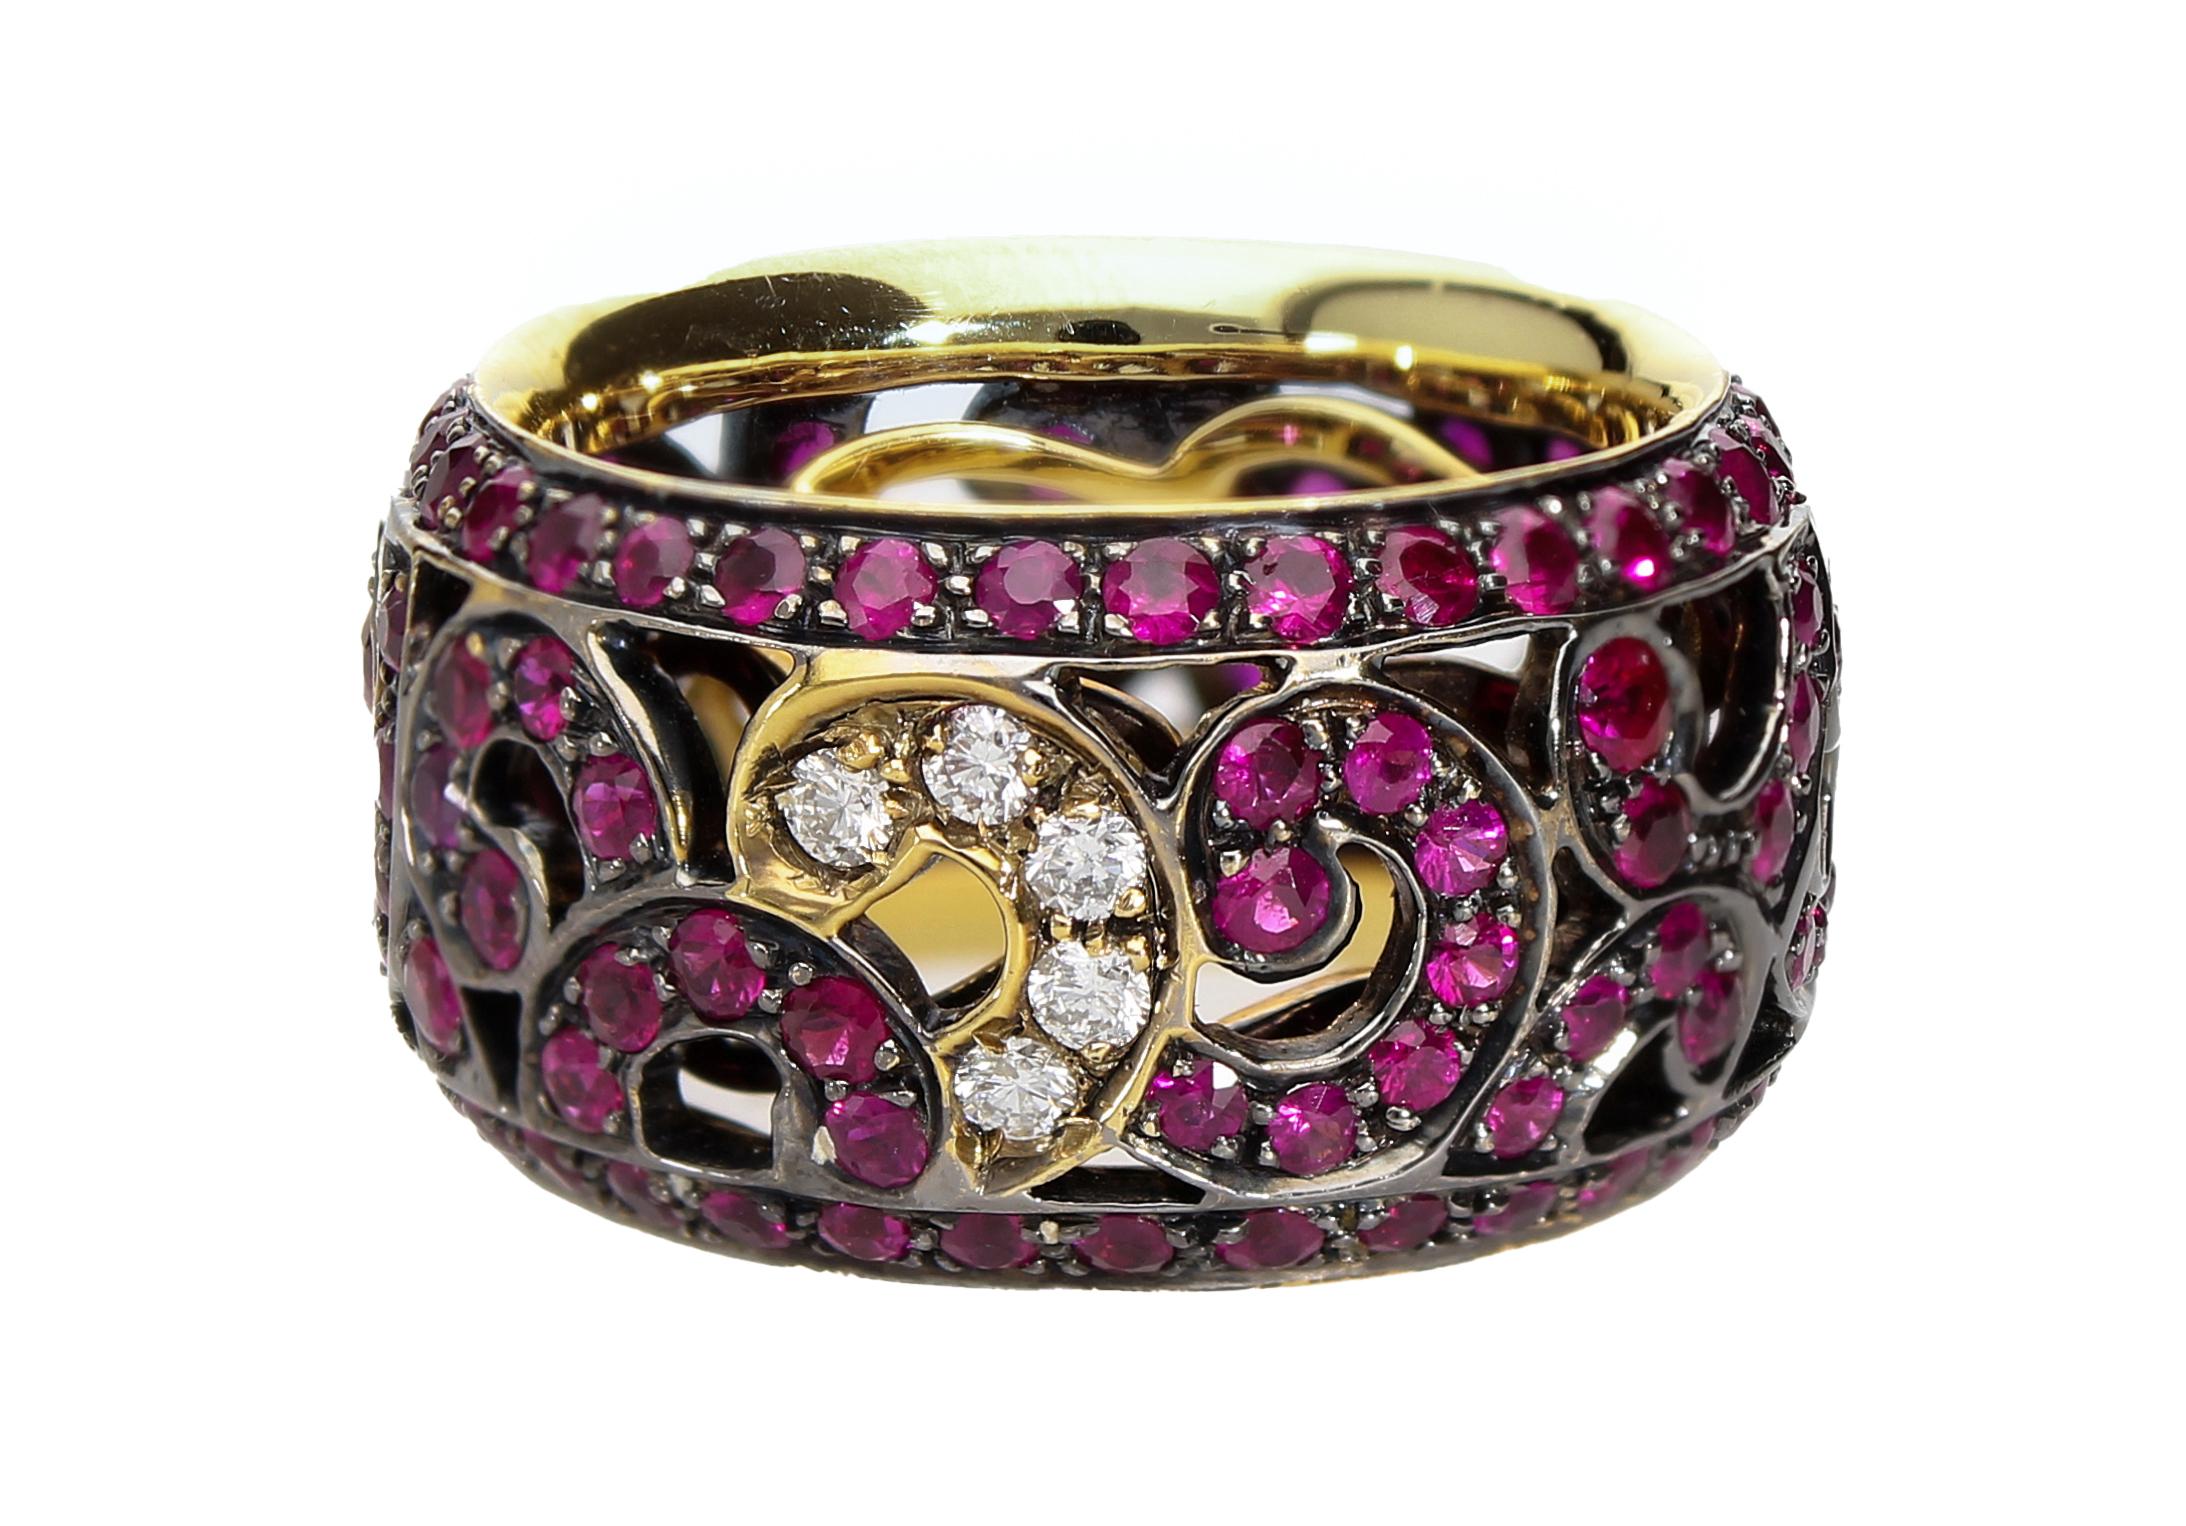 Eternity Band Ring with 4.13 ct of Rubies and 0.25 ct of Diamonds. Made in Italy For Sale 4